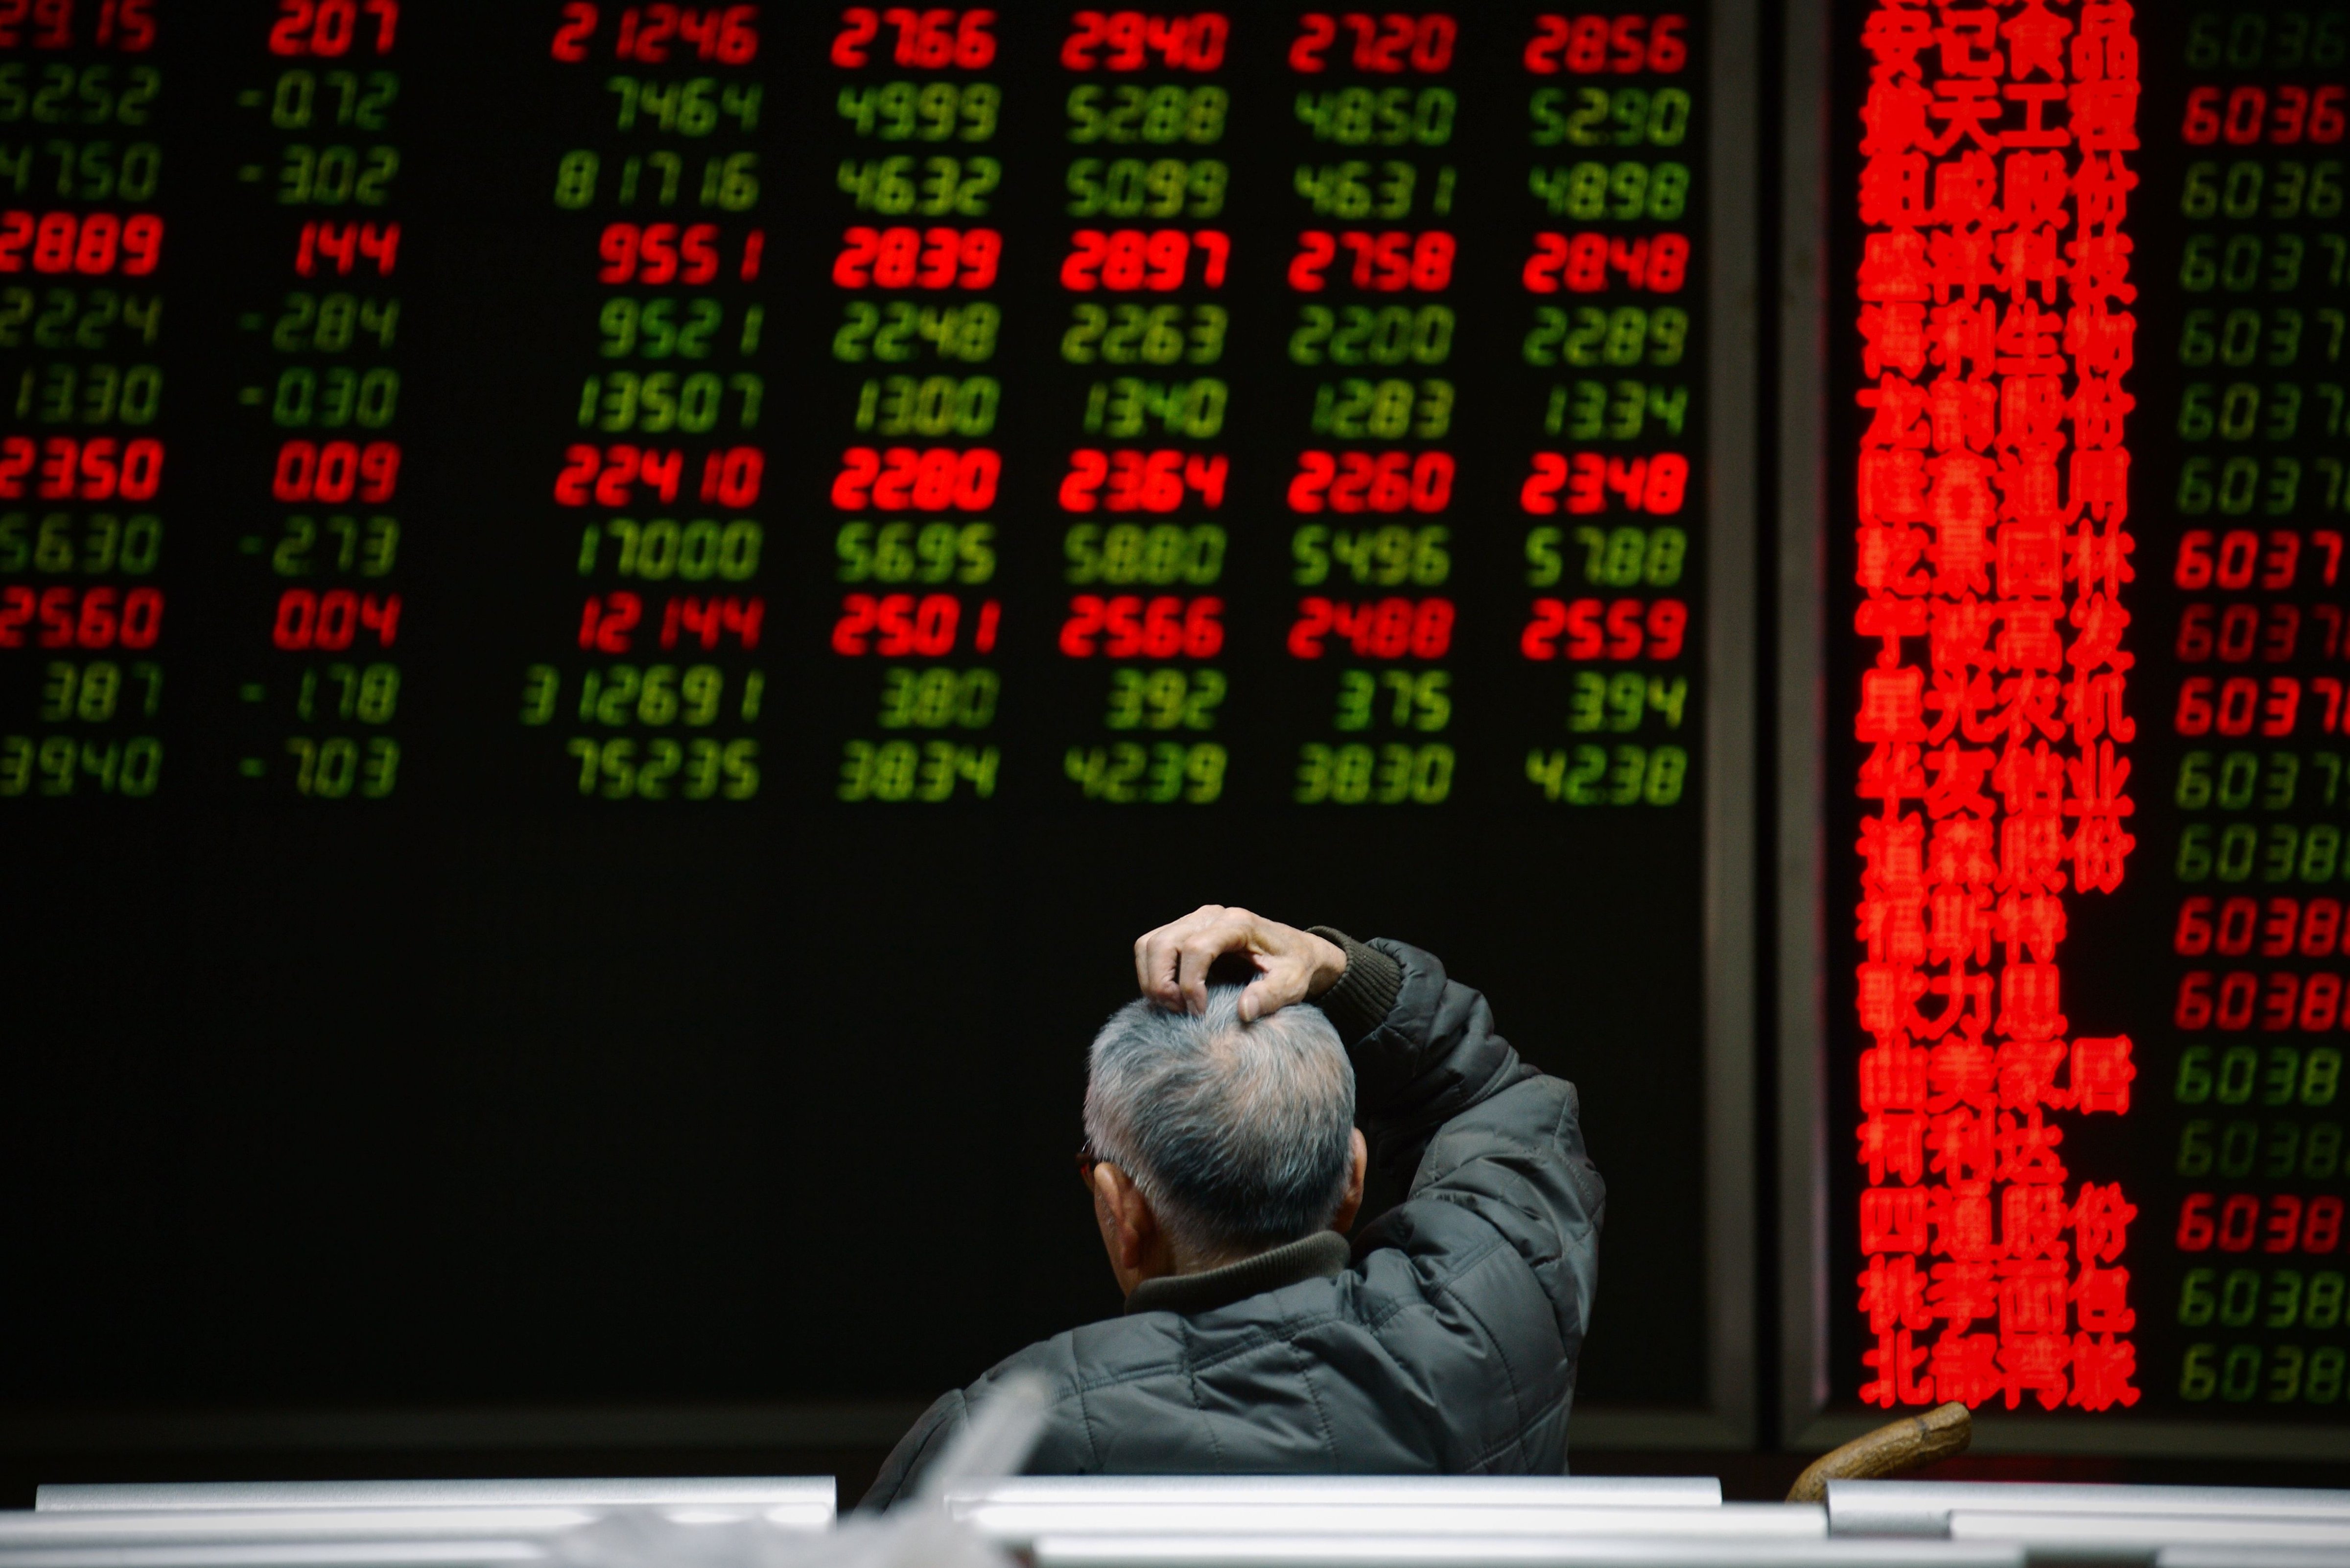 An investor looks at screens showing stock market movements at a securities company in Beijing on Jan. 14, 2016. (Wang Zhao—AFP/Getty Images)